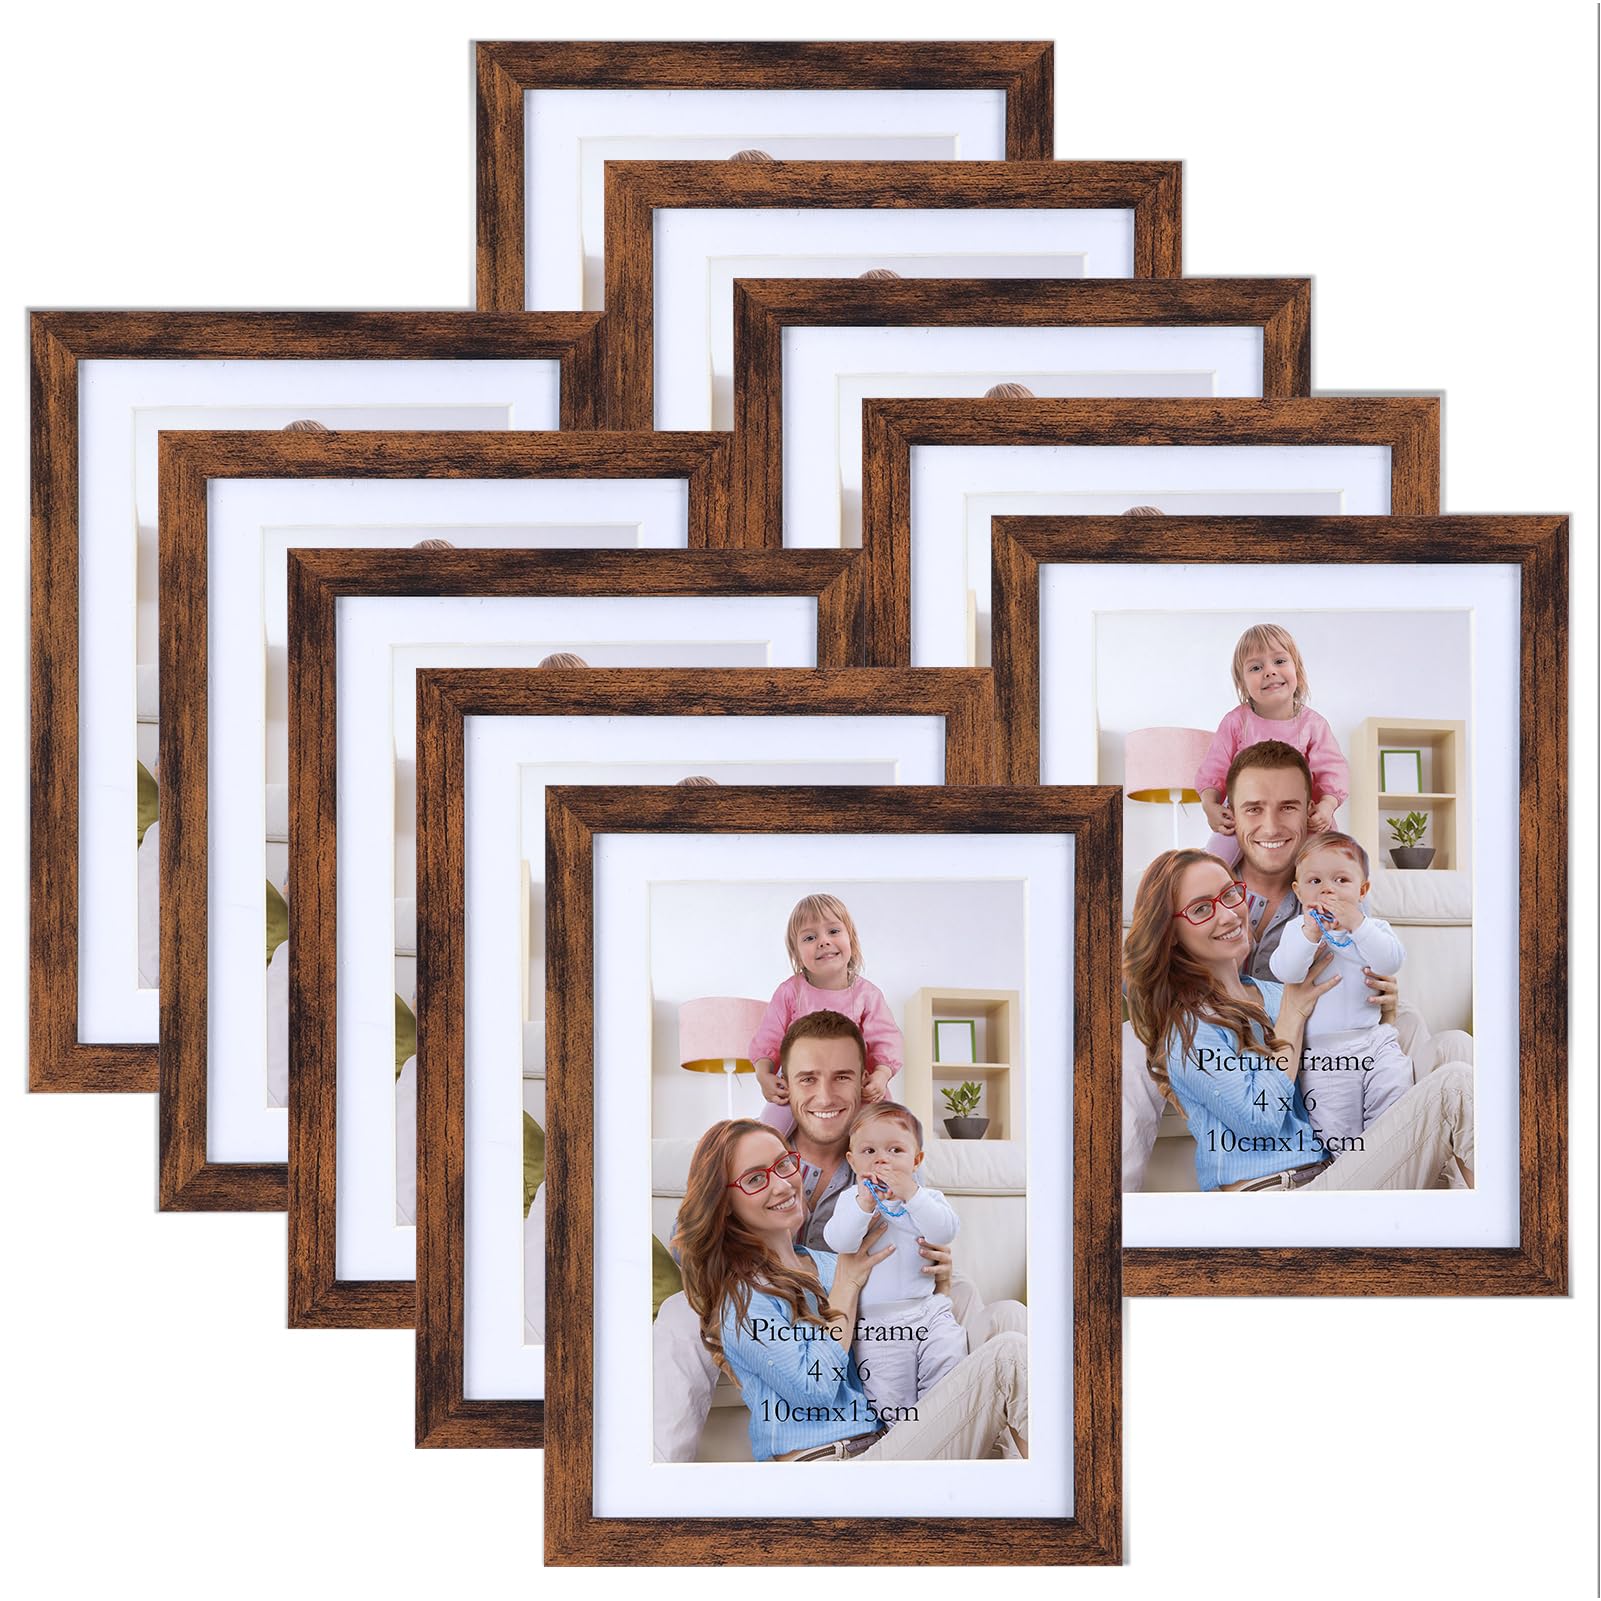 Giftgarden 5x7 Picture Frame Brown Set of 10, Matted to Display 4x6 Photos  with Mat or 7x5 Picture without Mat, Rustic Walnut Fr